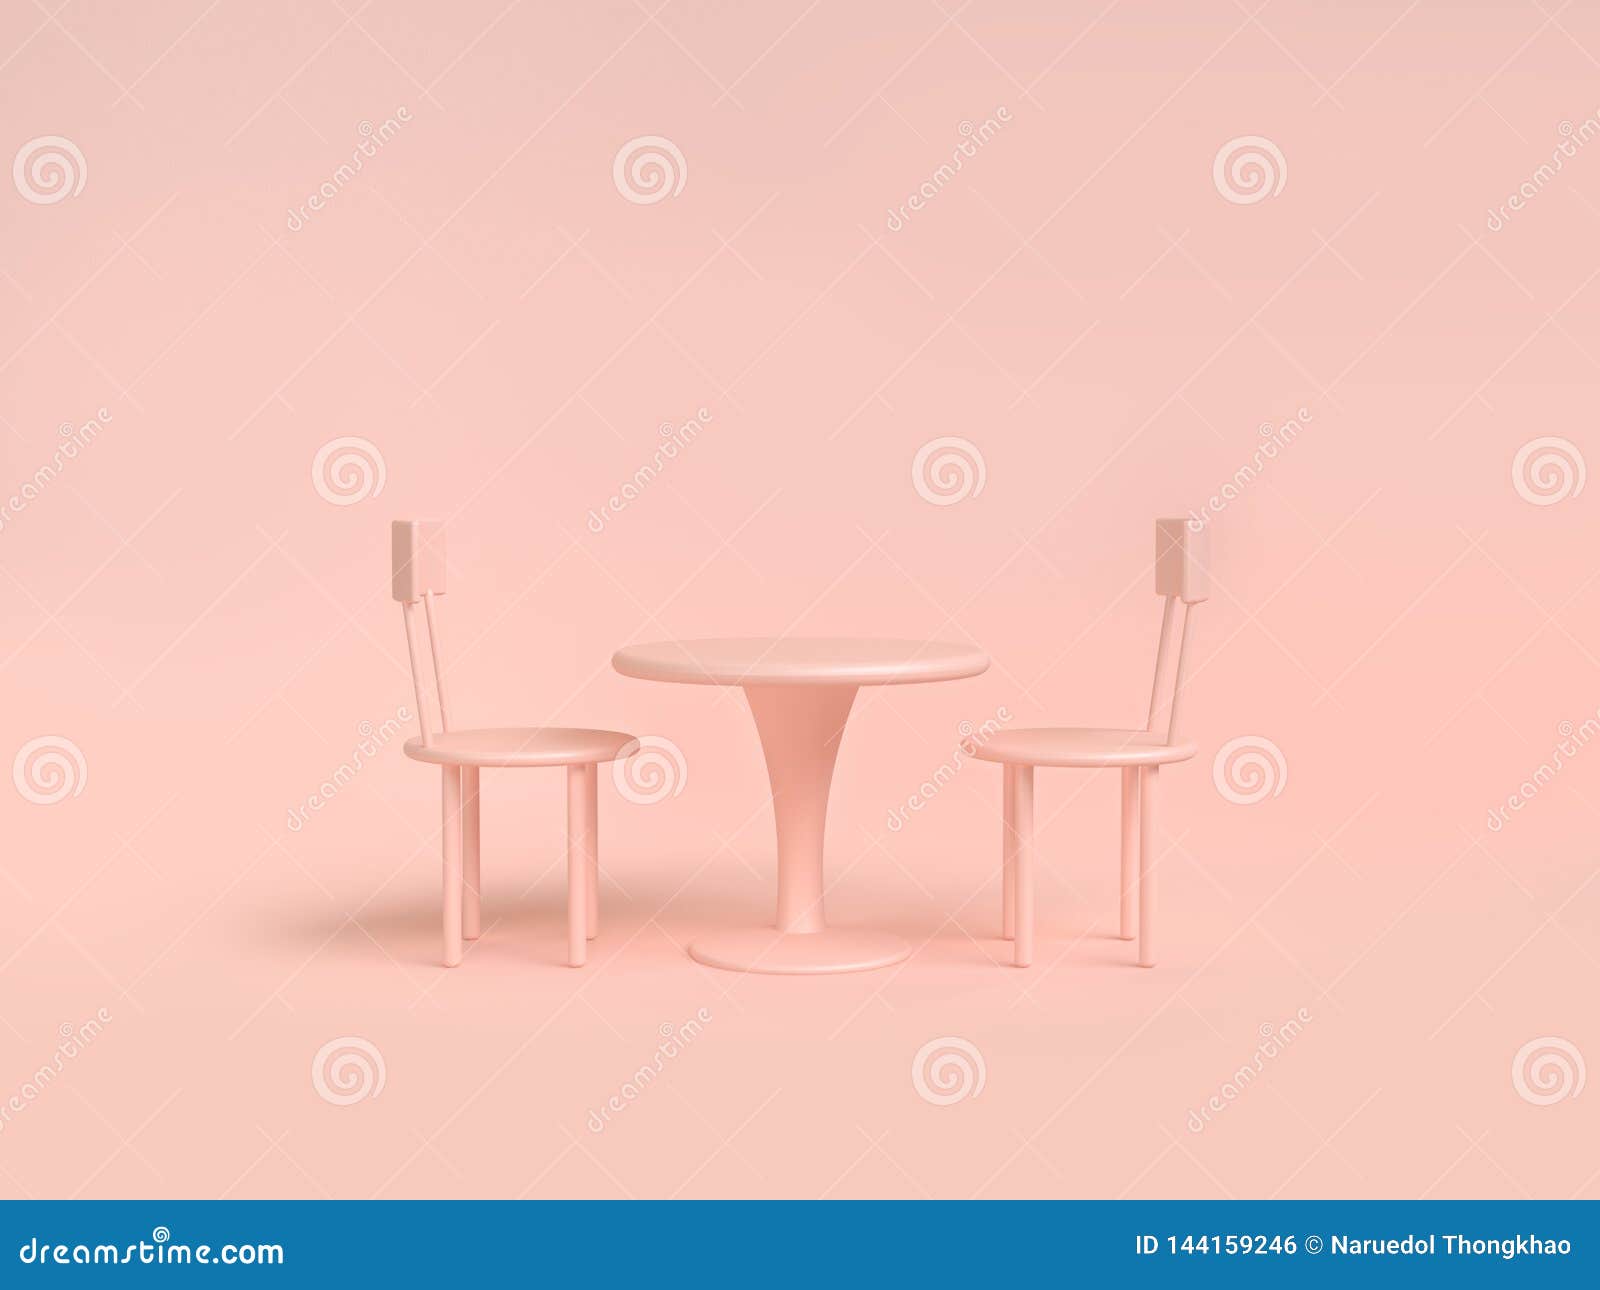 Pink Table Abstract